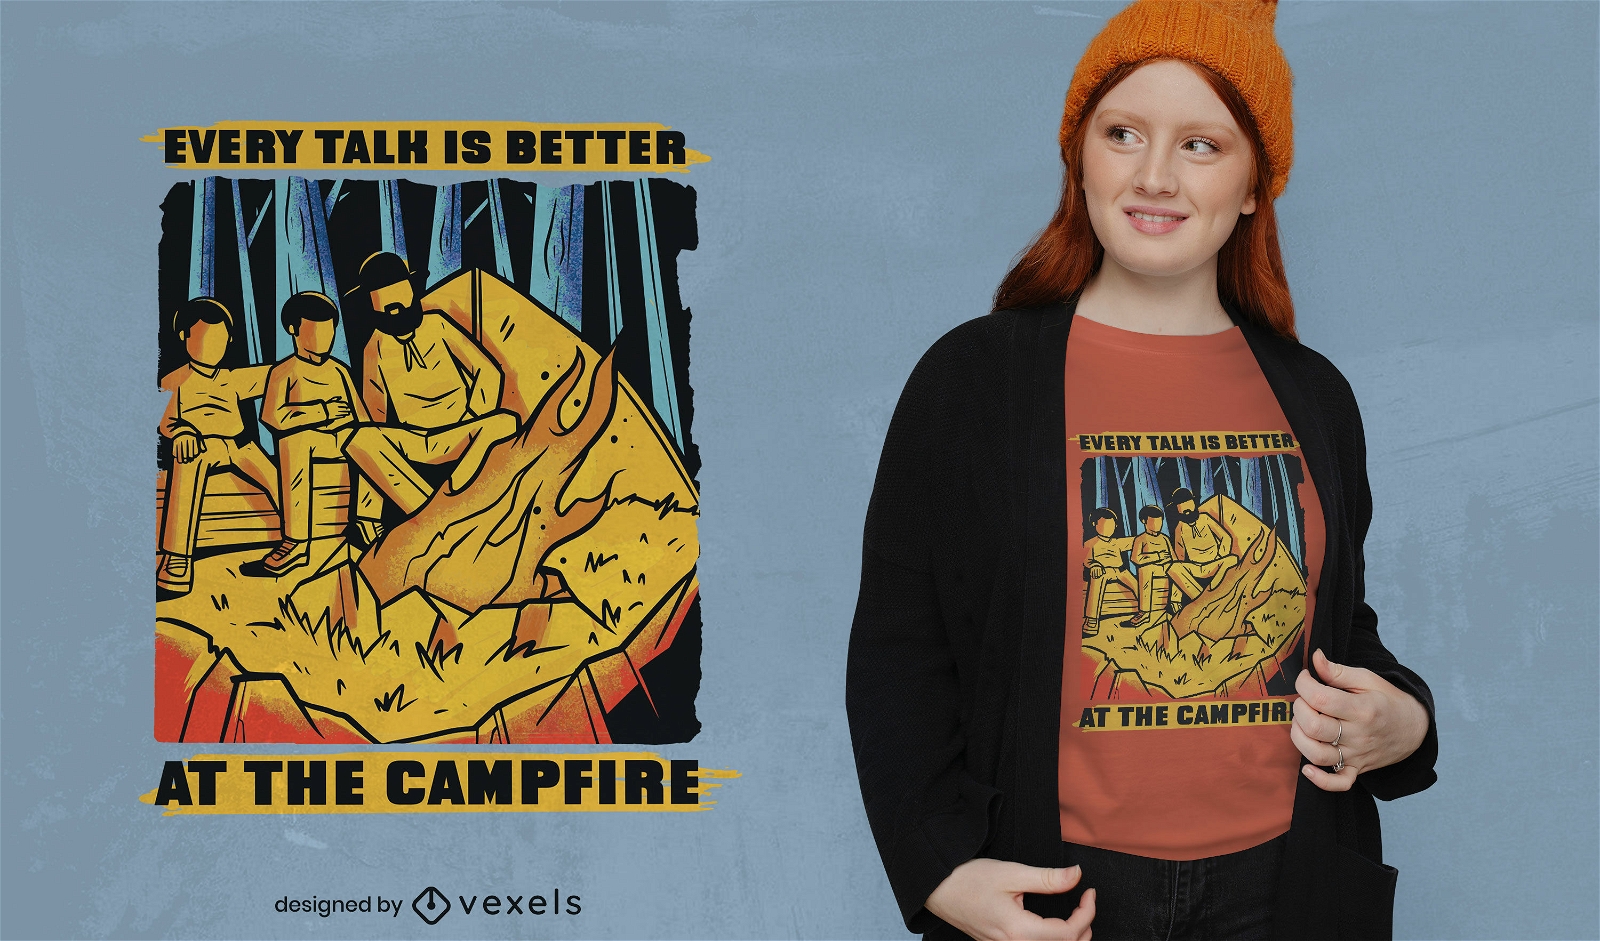 Campfire quote camping t-shirt design